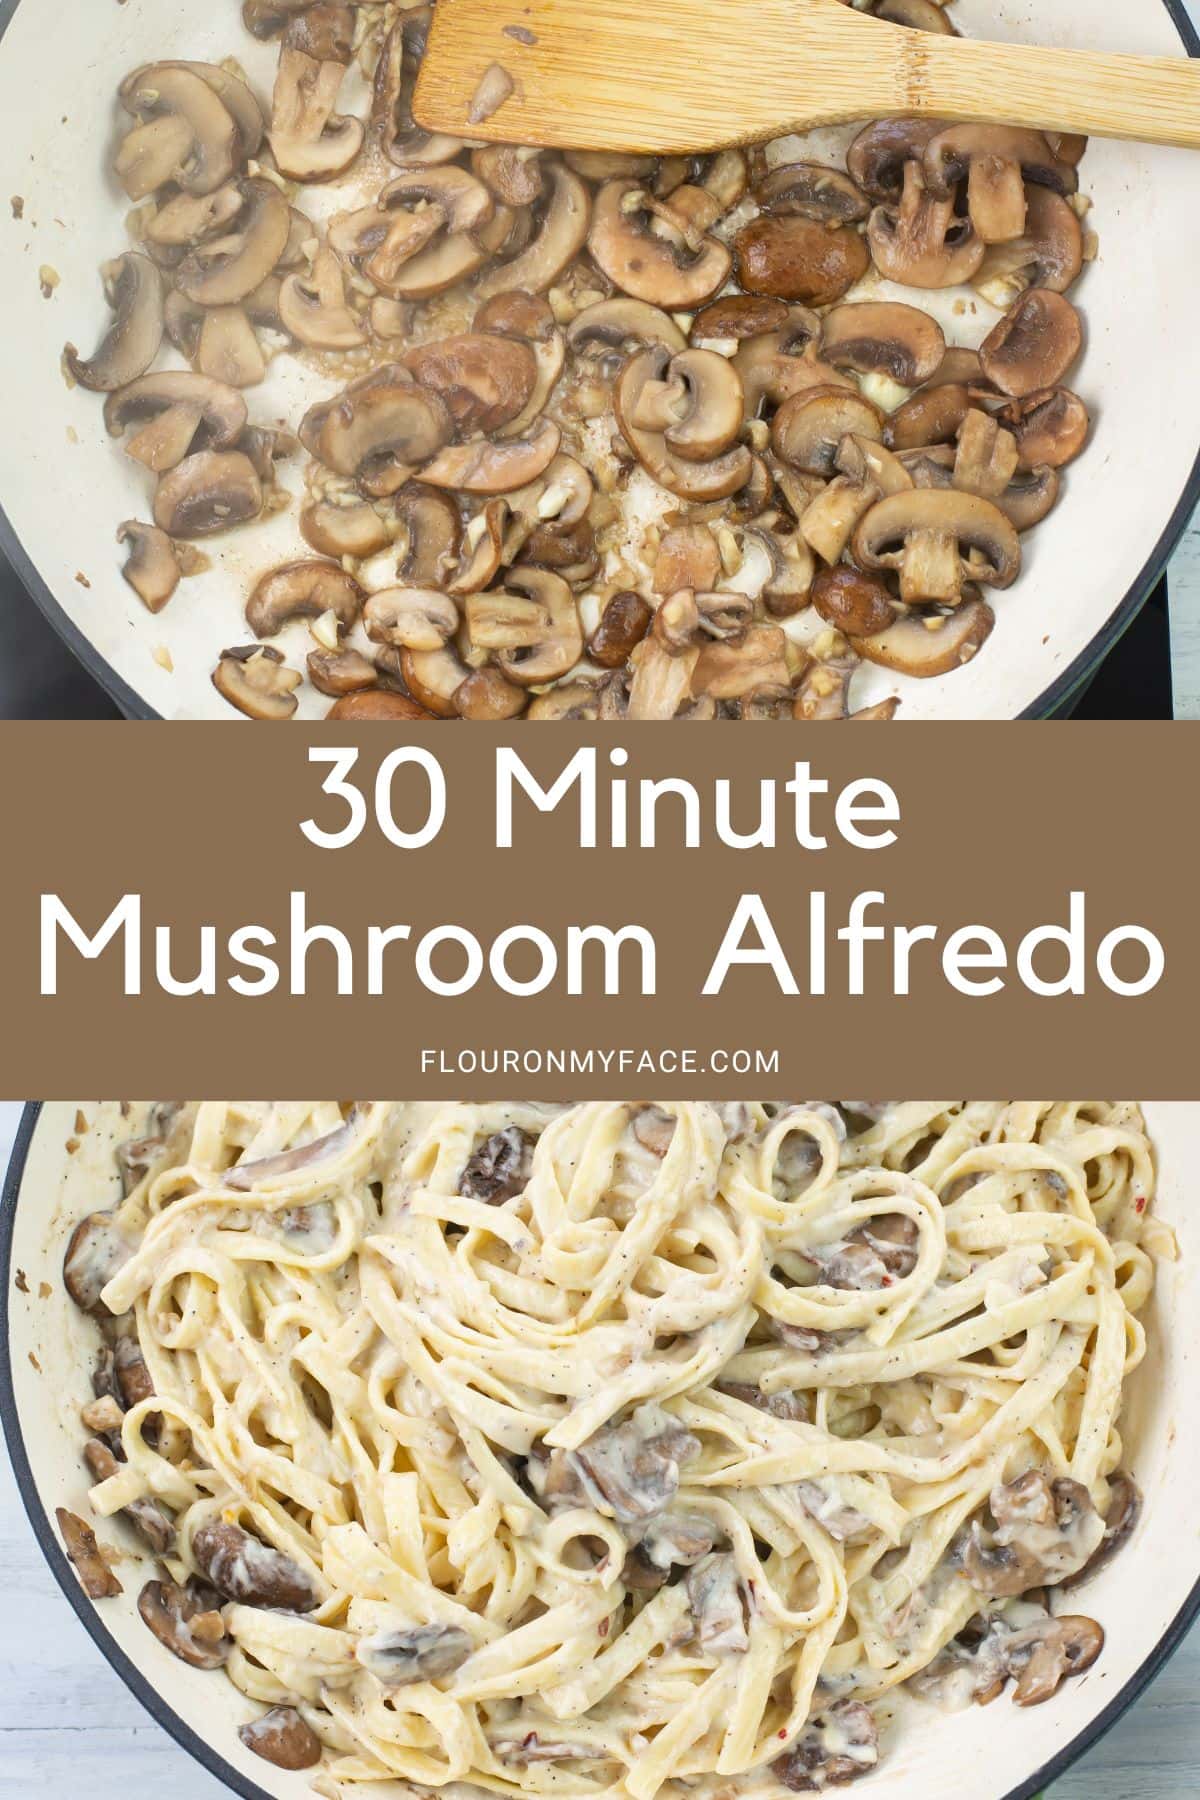 Long vertical image showing Mushroom Alfredo cooking and served over pasta.